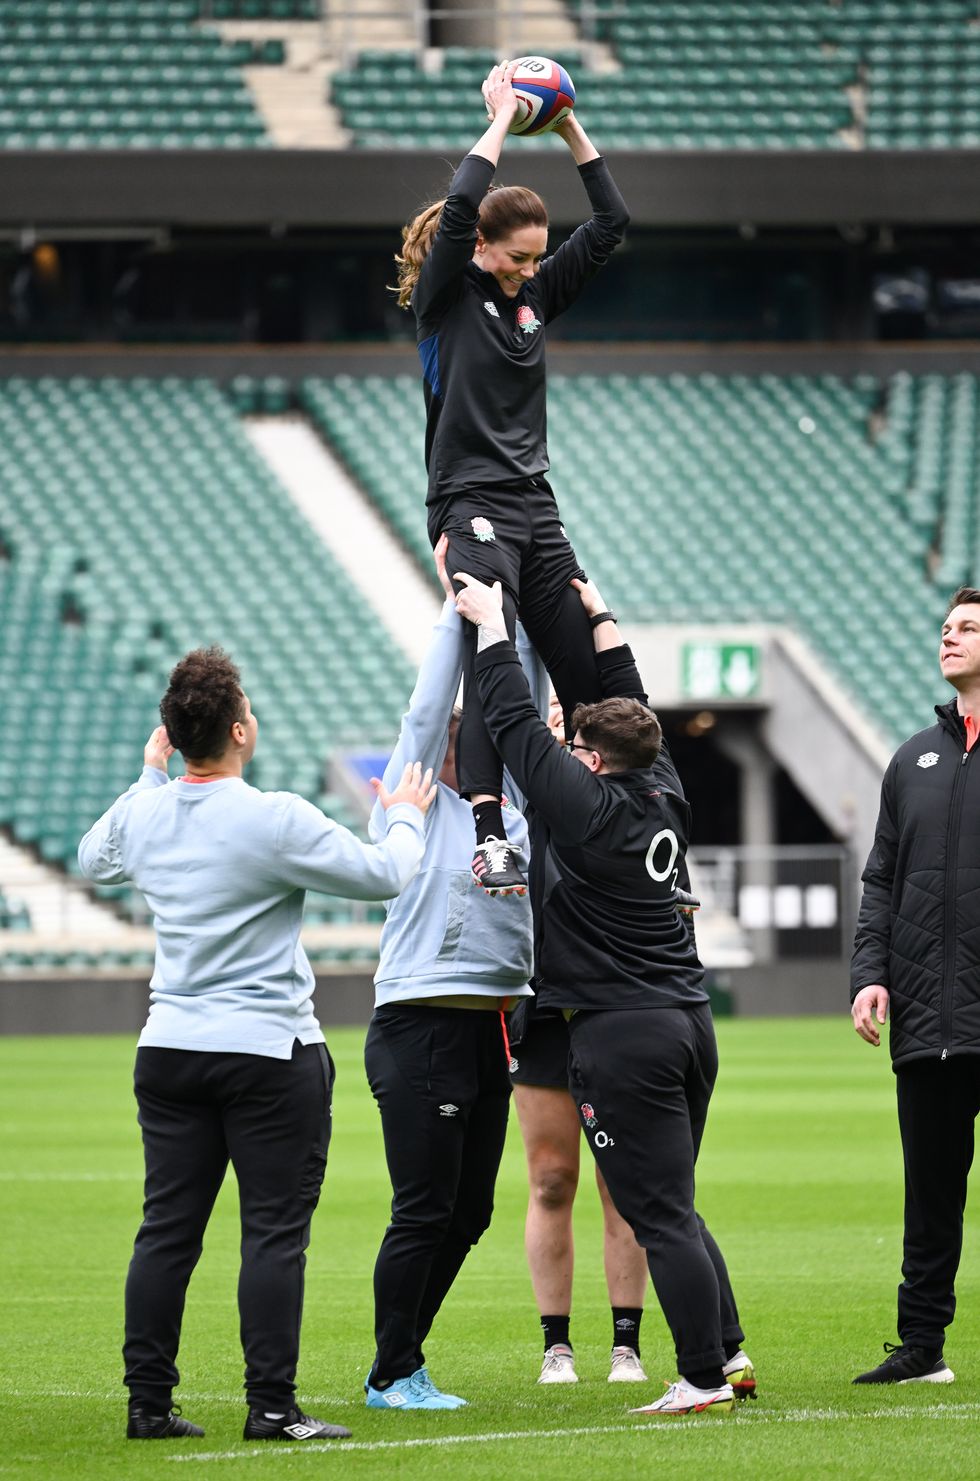 kate middleton plays rugby on field